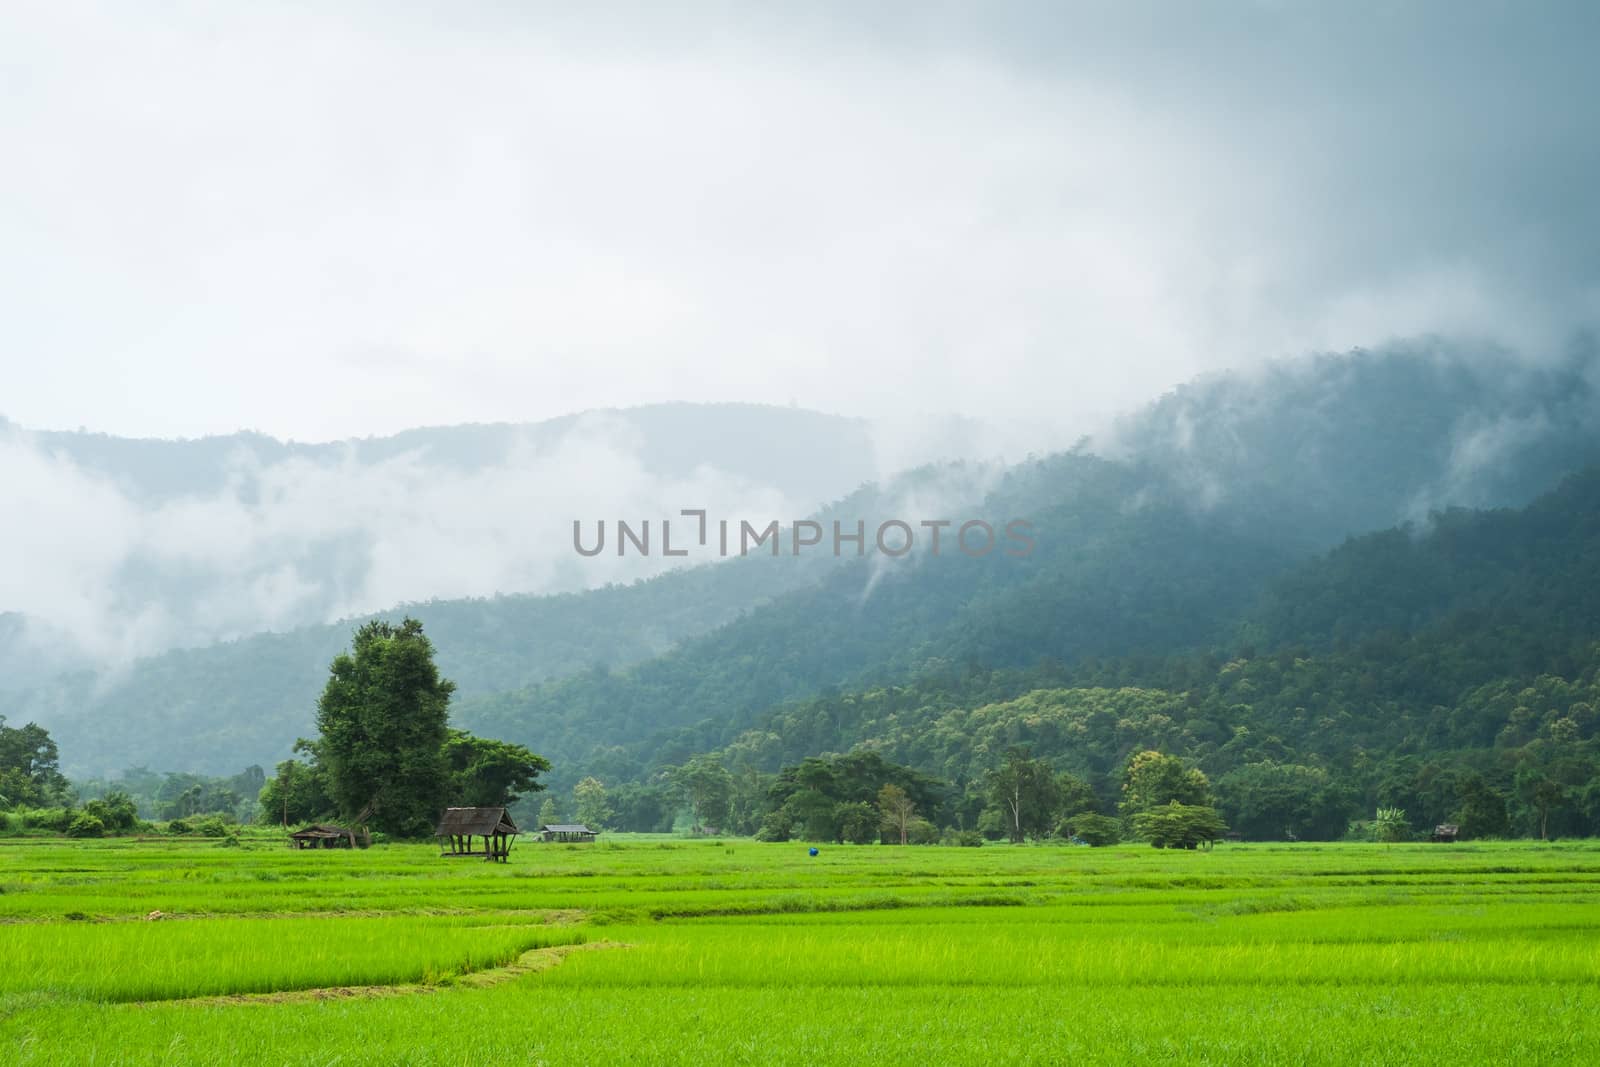 landscape of rice field in thailand by moggara12